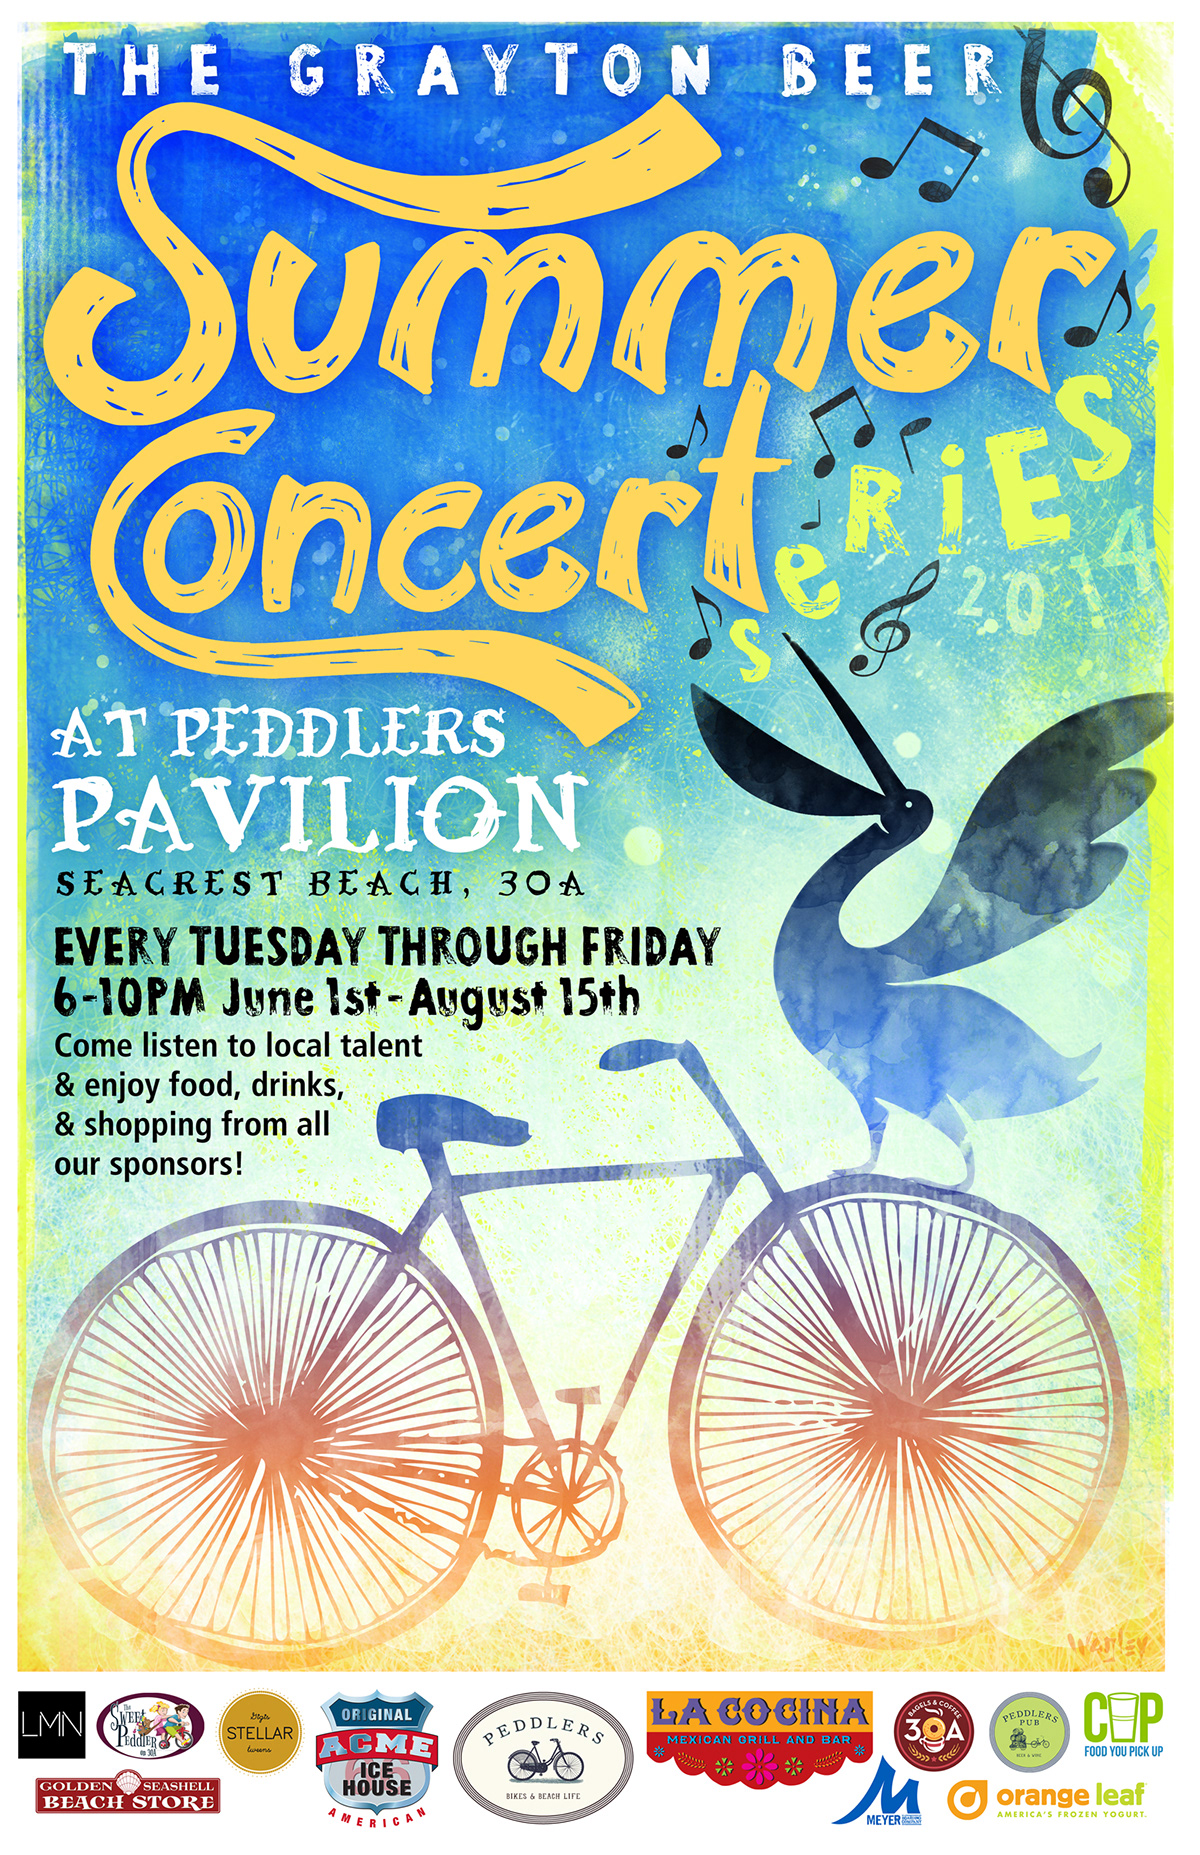 concert Grayton grayton beer summer 30A peddlers pavillion watercolor poster digital stylized painterly sea crest beach Rebecca Wagley Becky Wagley Wagley Creative